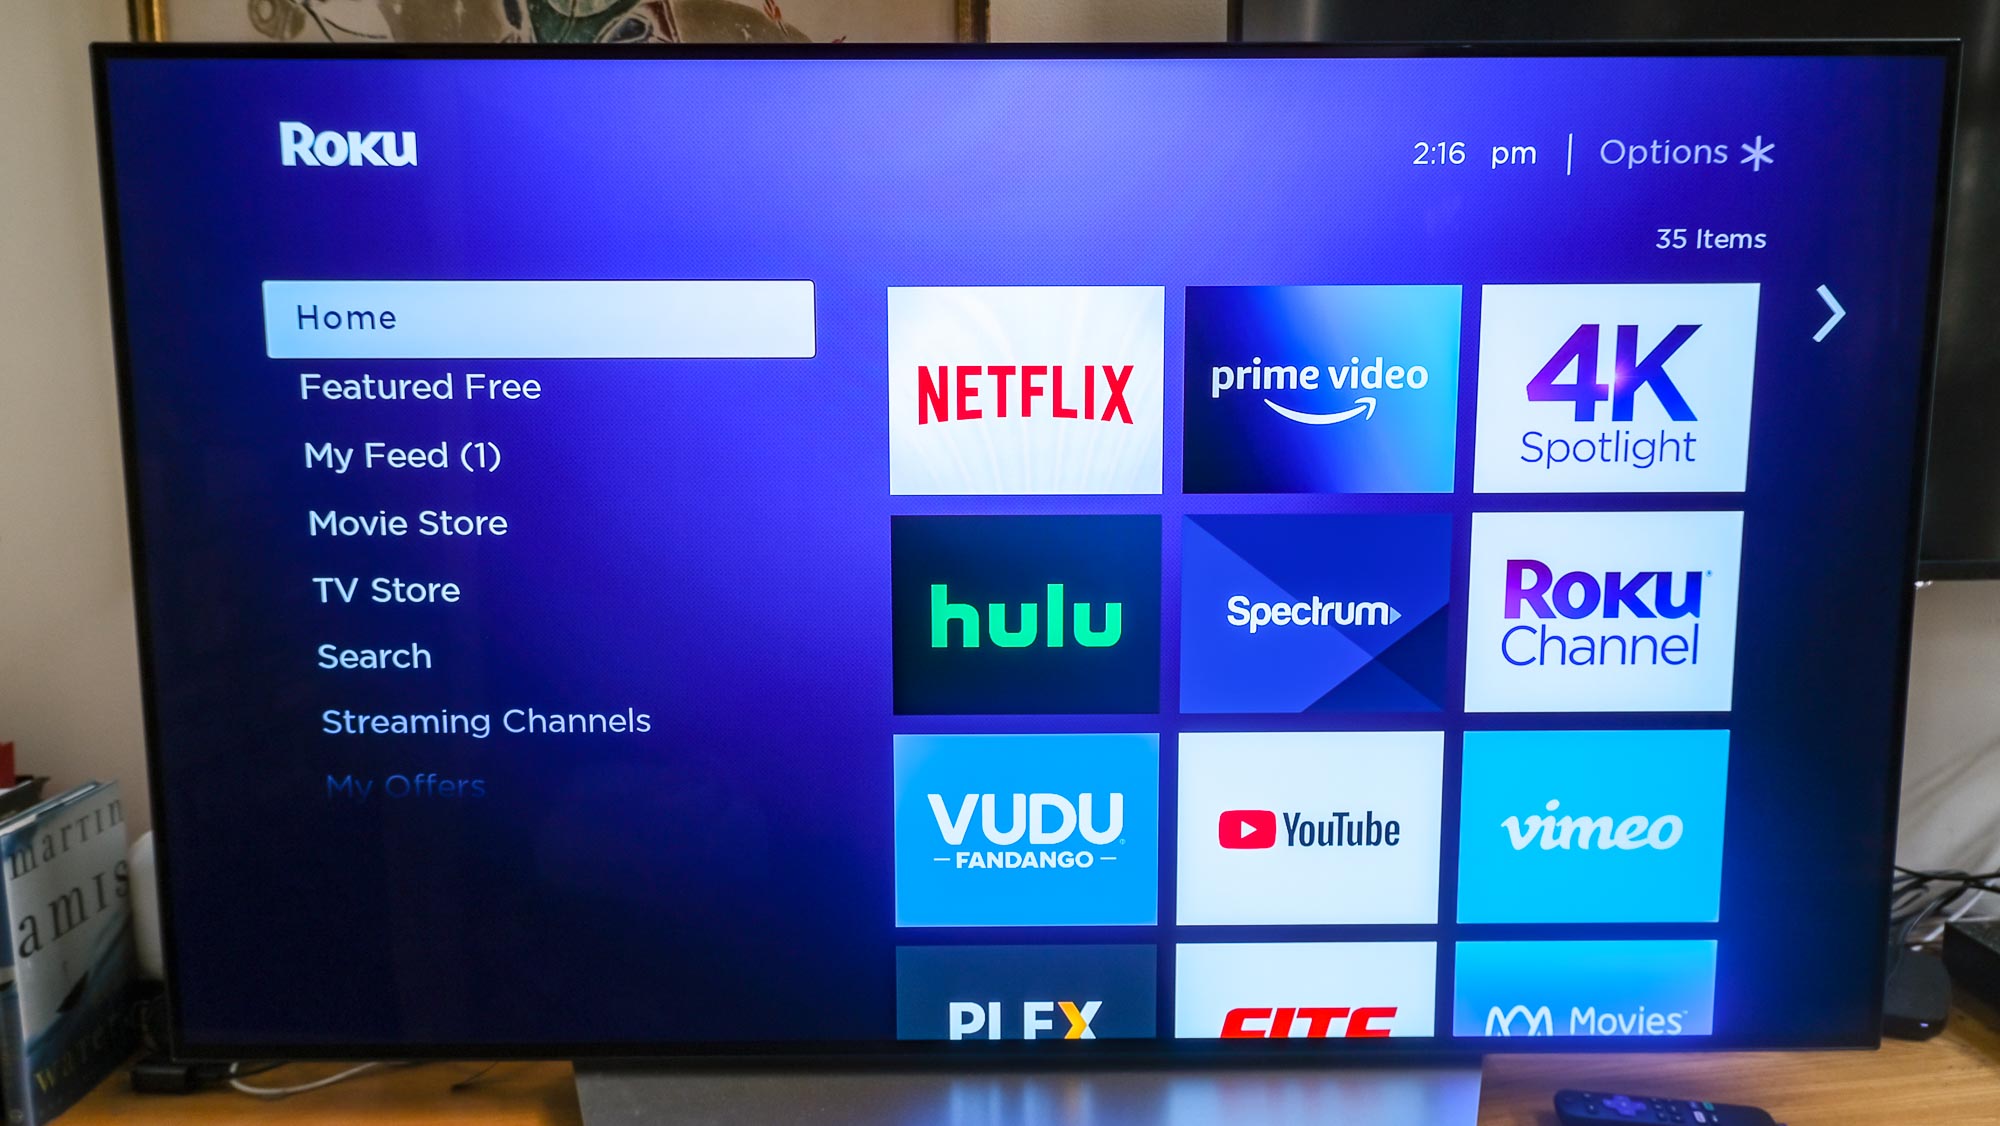 The home screen of the Roku Streaming Stick 4K